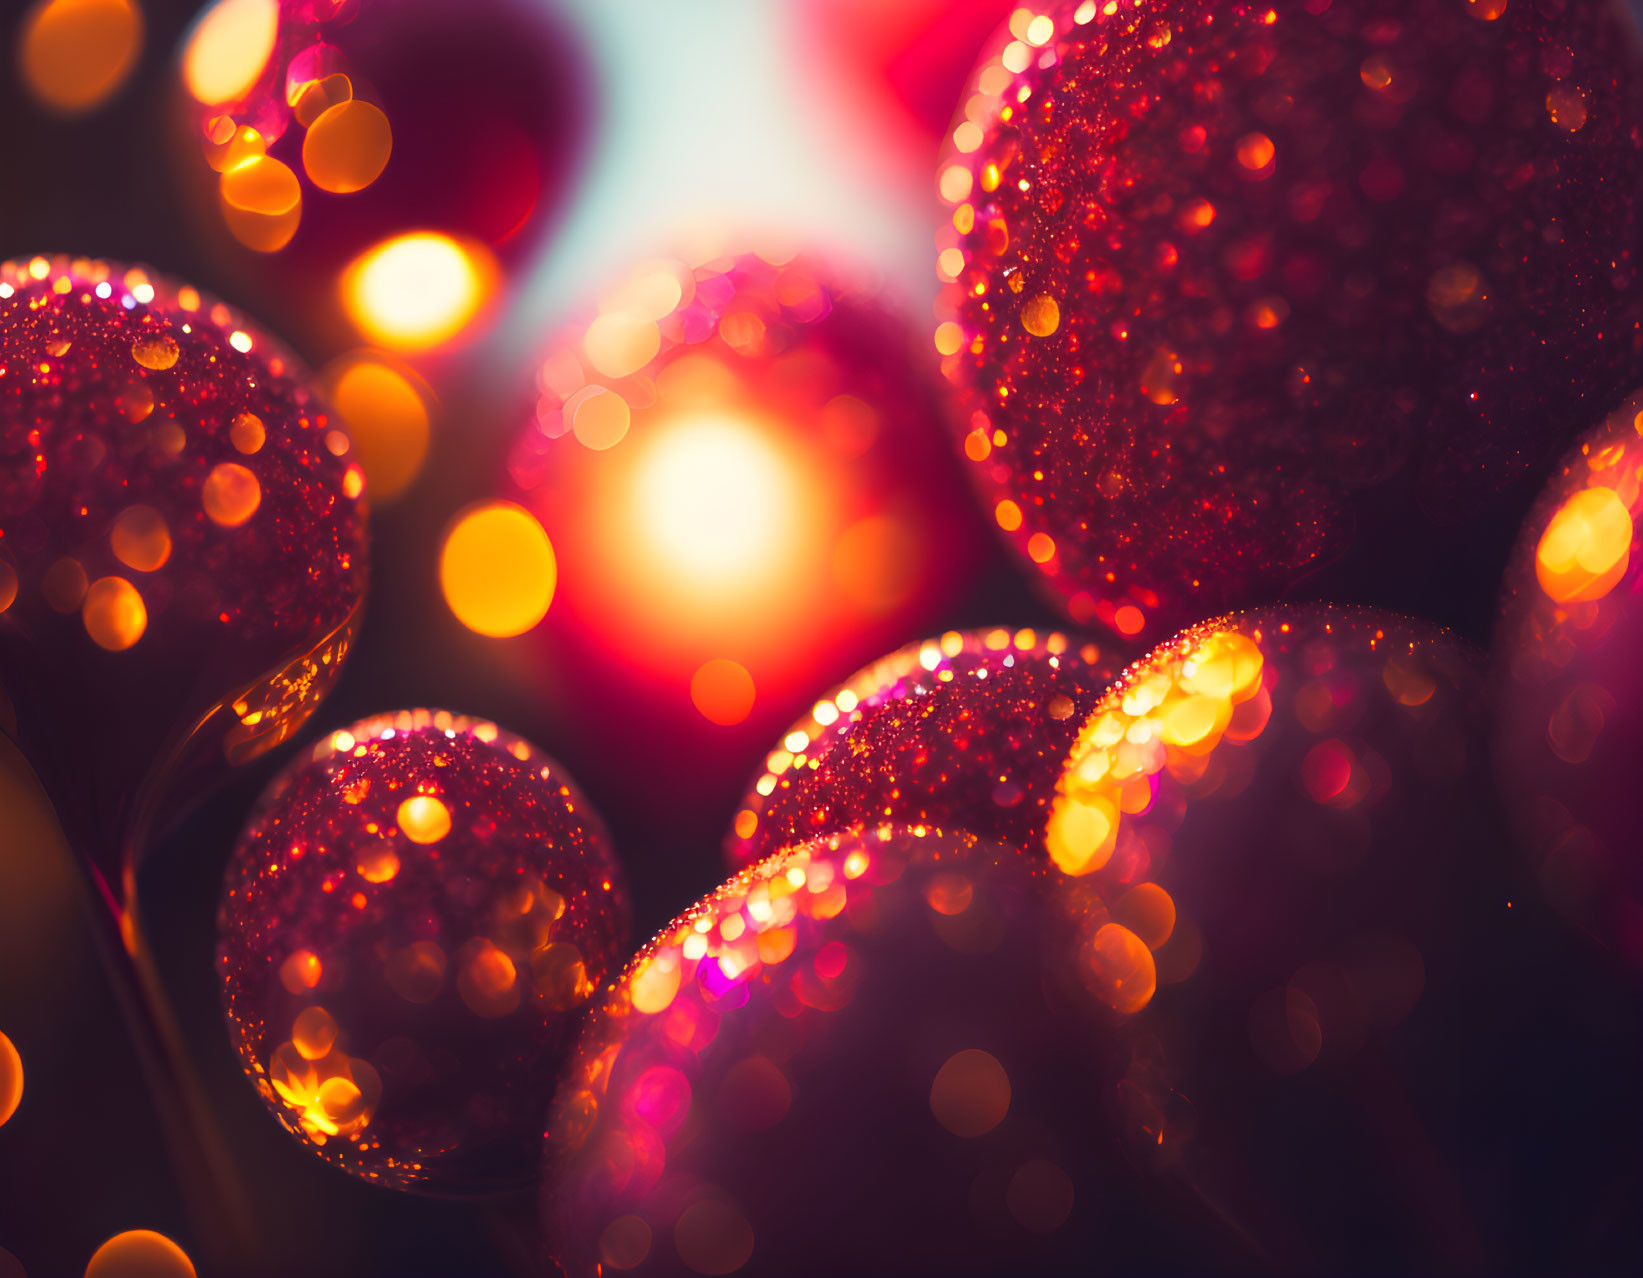 Shiny red ornaments with festive bokeh background